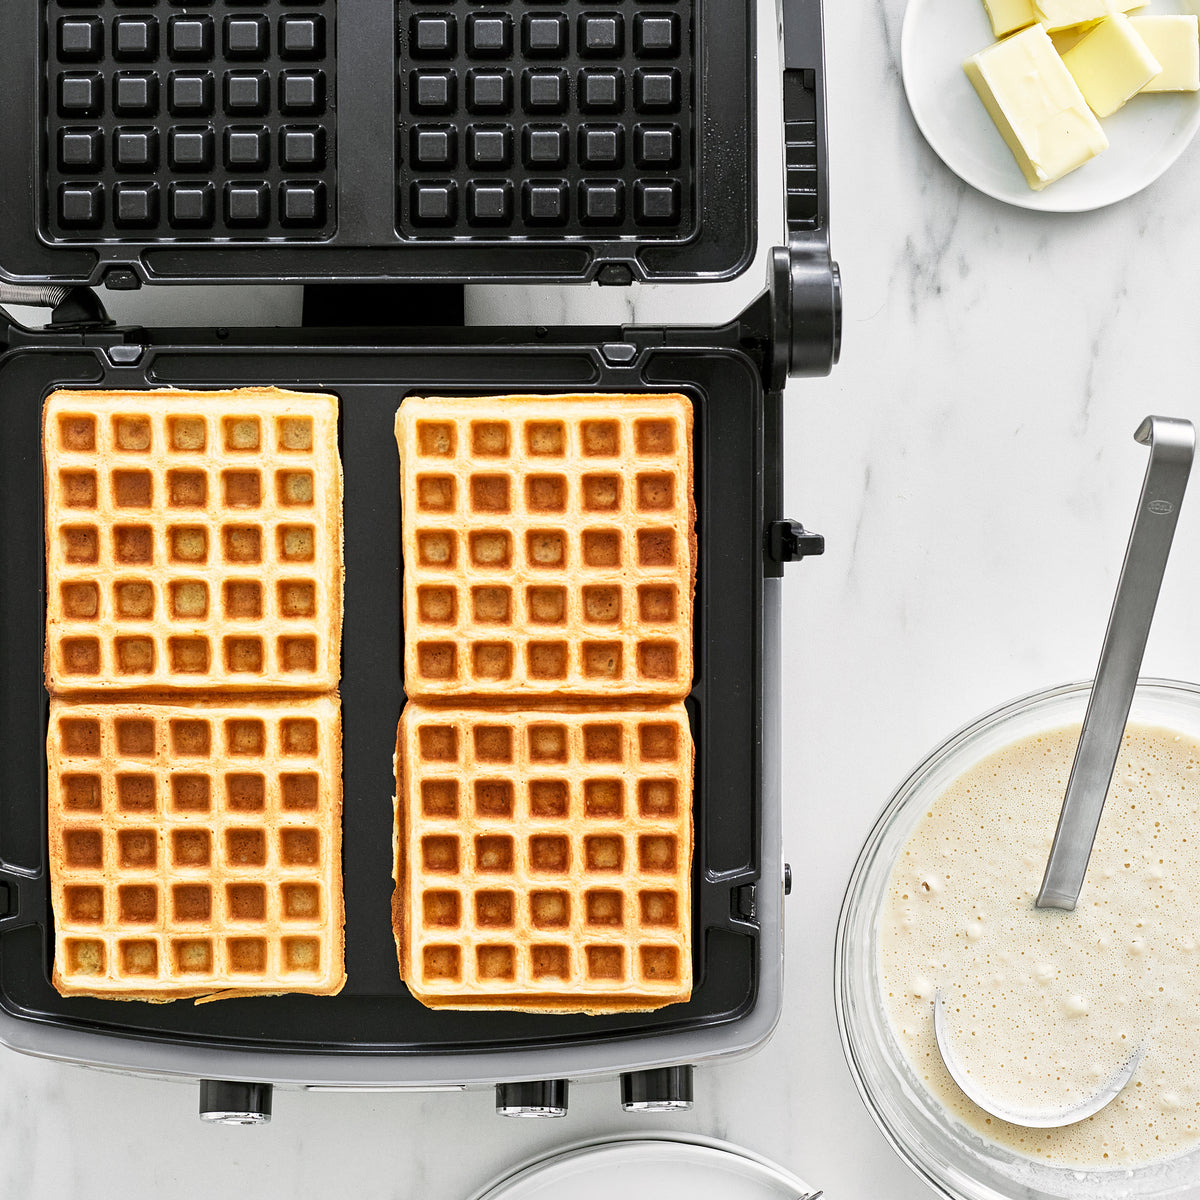 7 Best Waffle Makers 2023 Reviewed